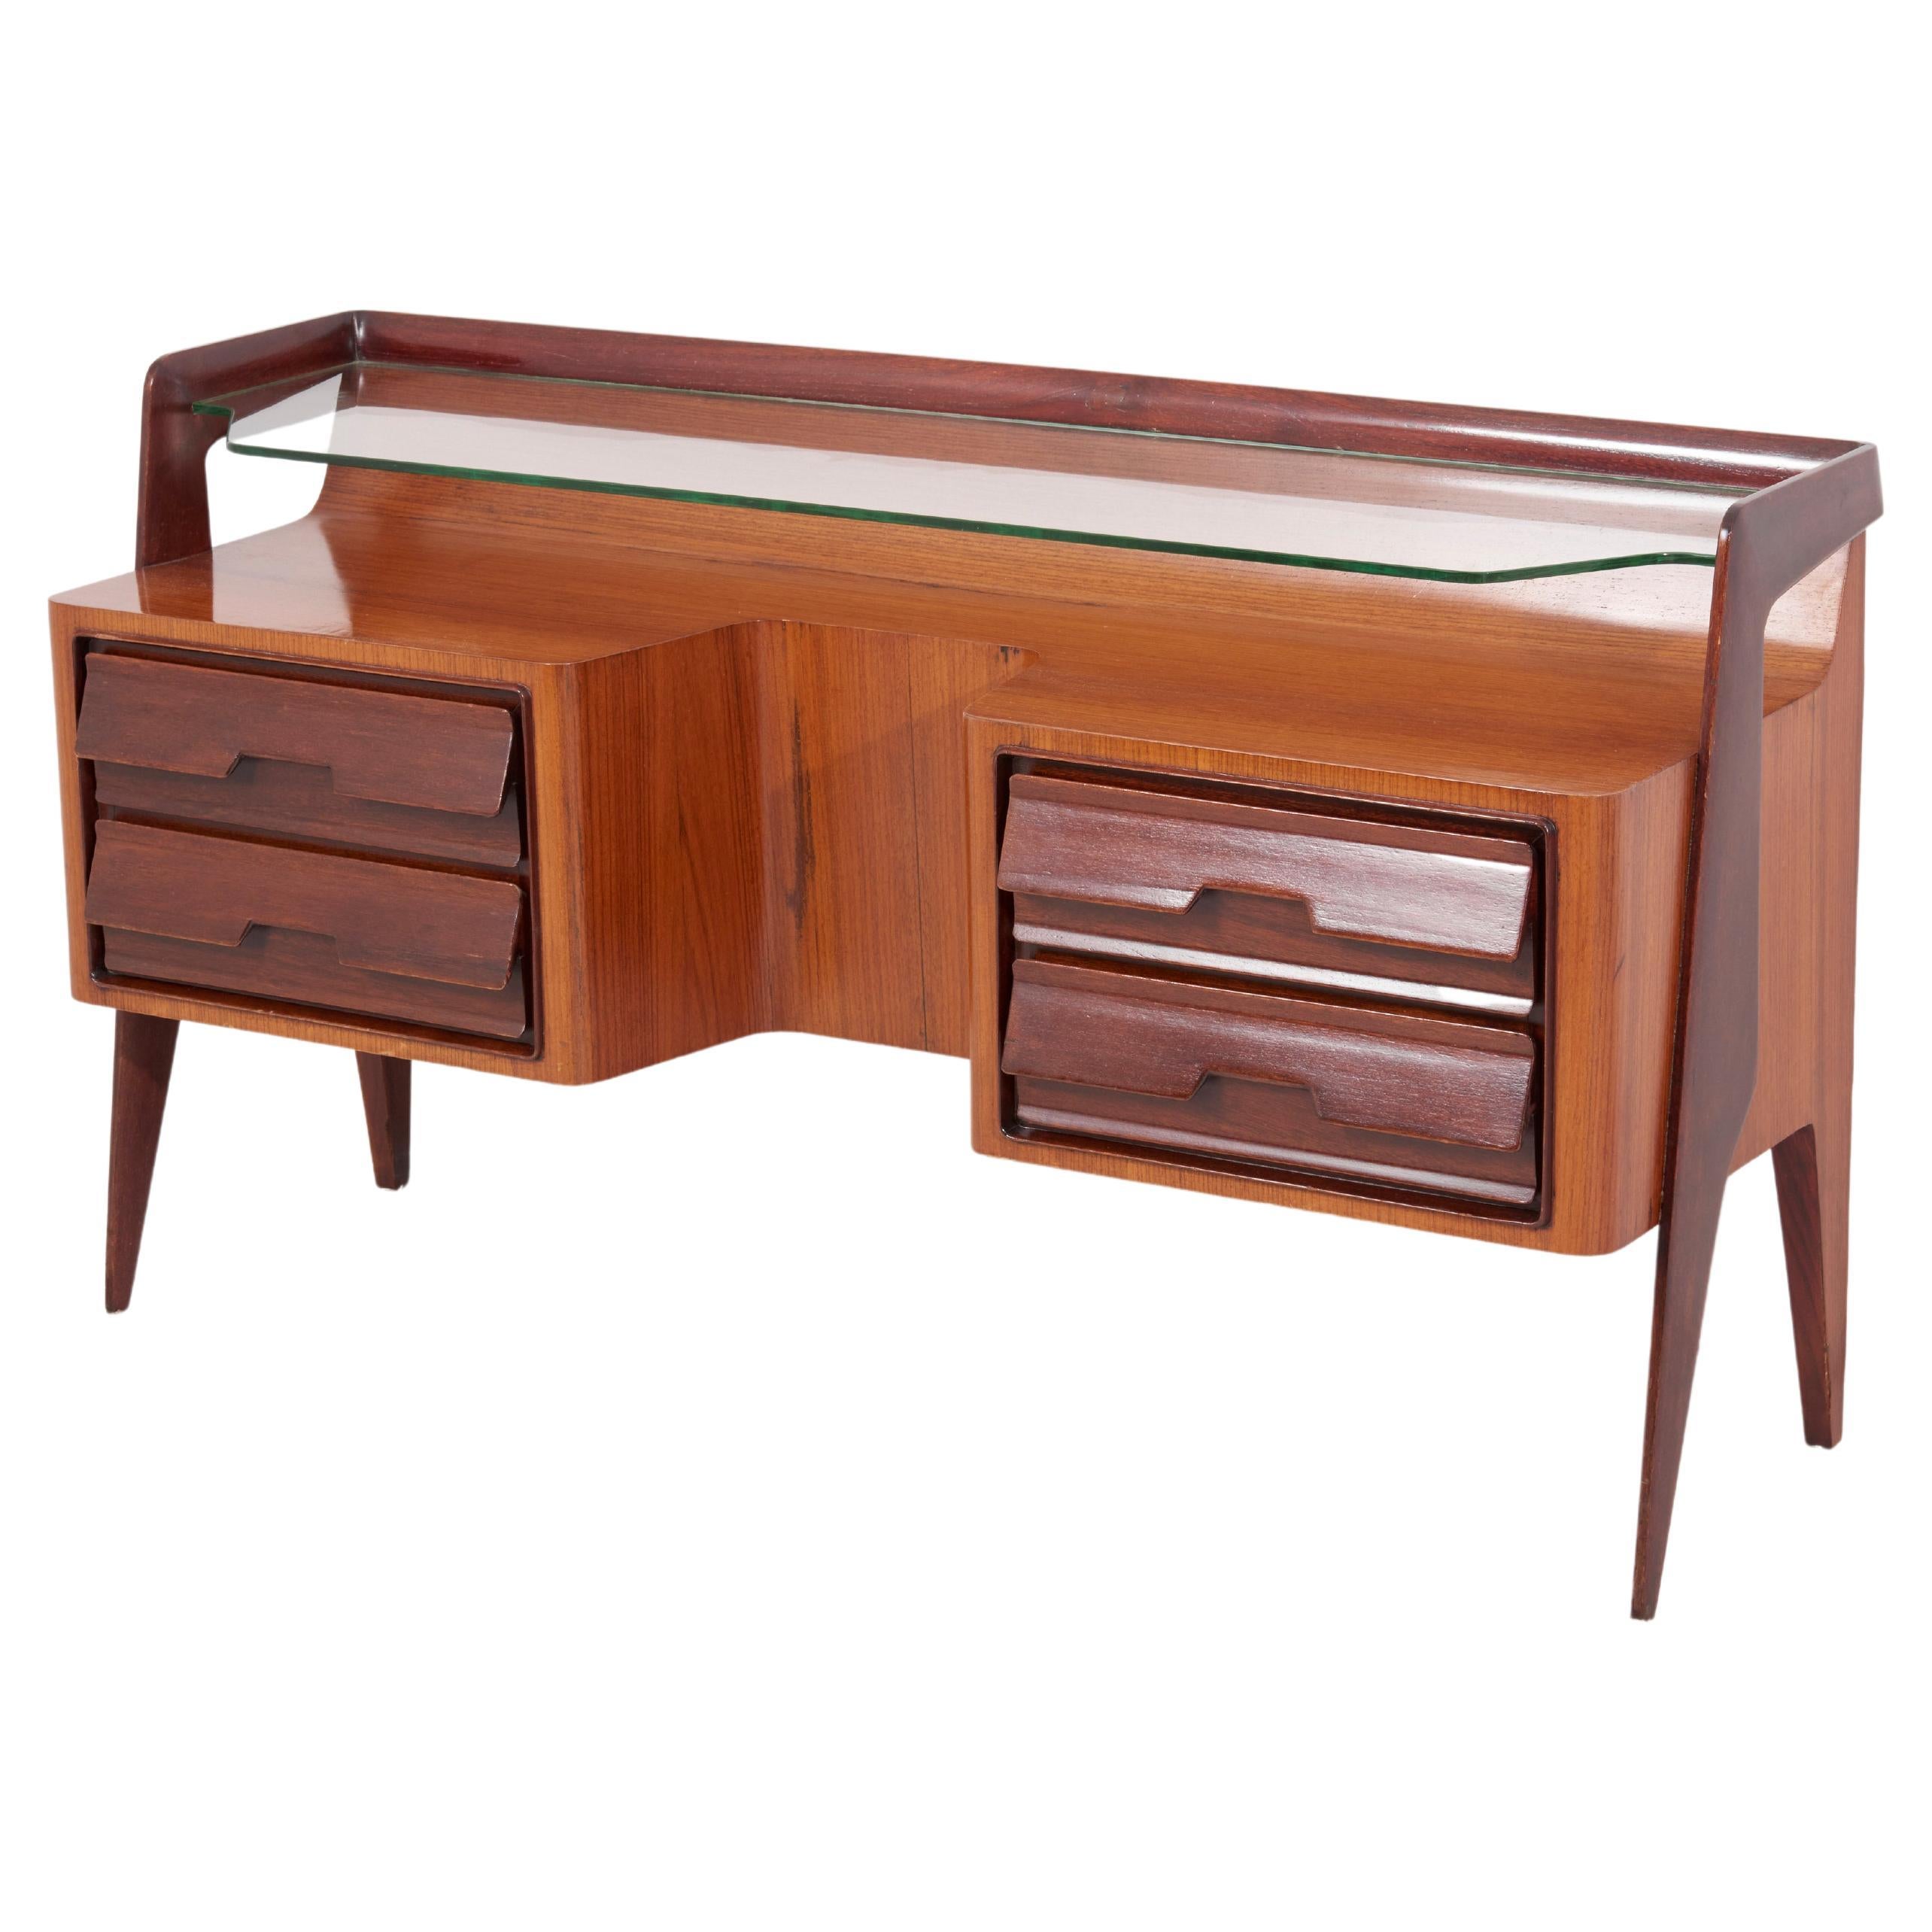 1950s Chest of Drawers or Credenza in Teak Plywood, Mahogany For Sale